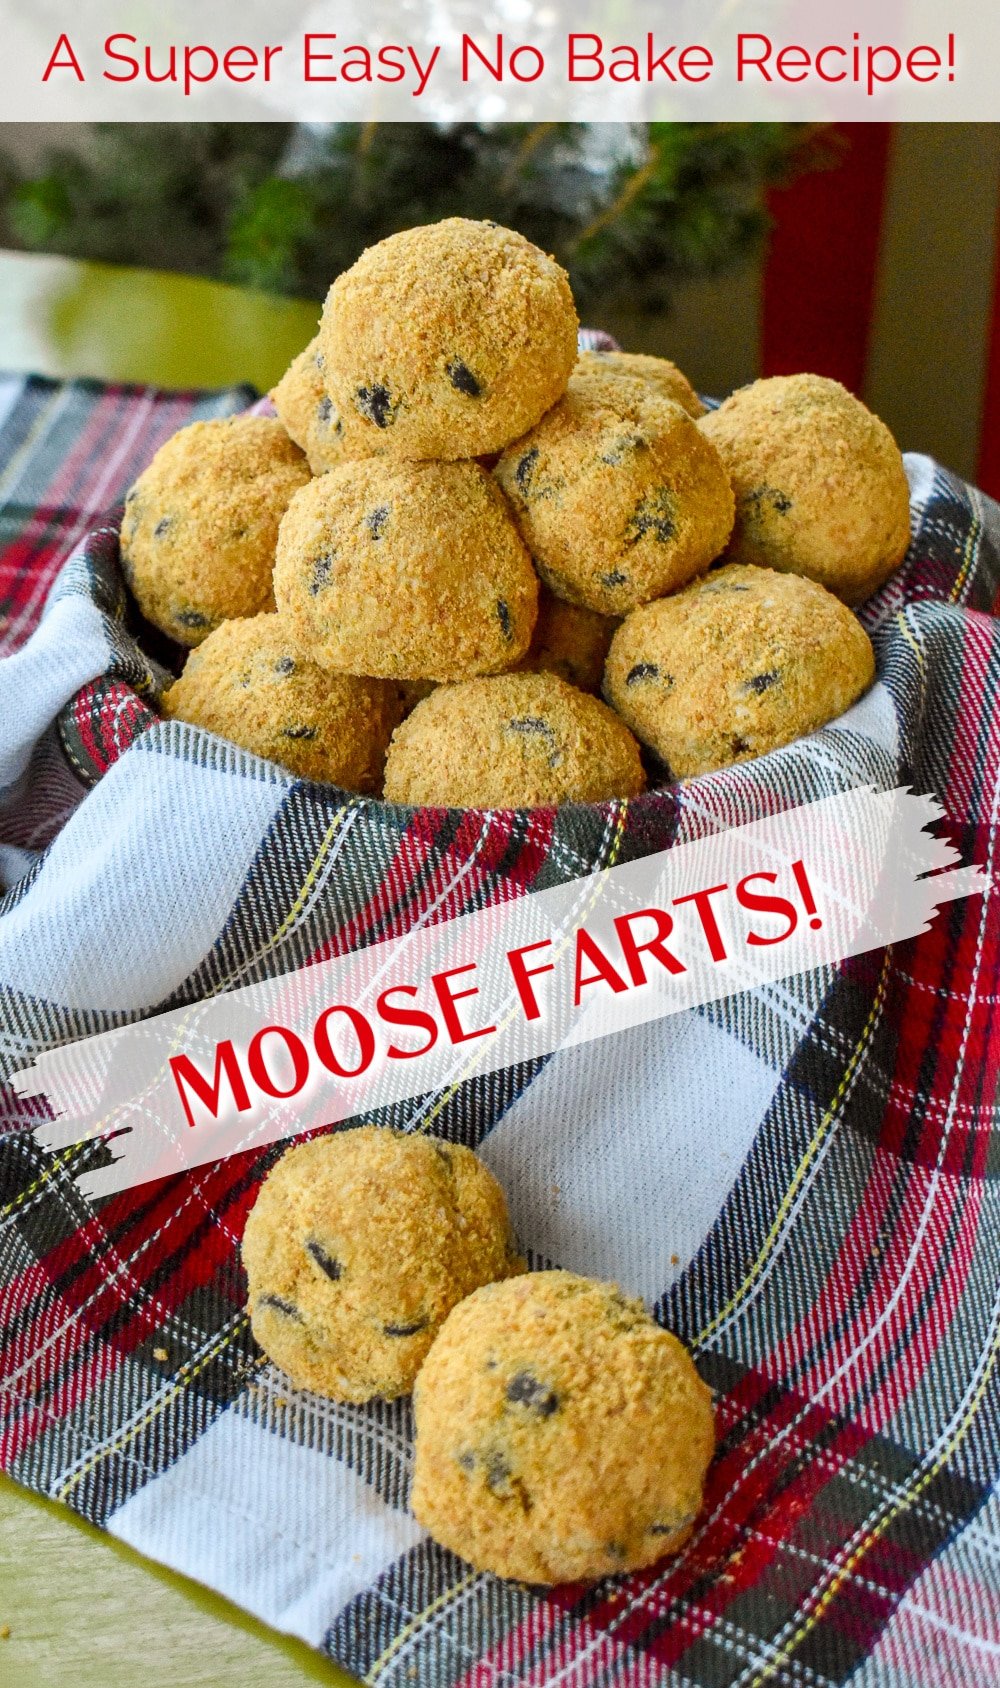 Photo of Moose Fart tumbling out of as bowl with title text added for Pinterest